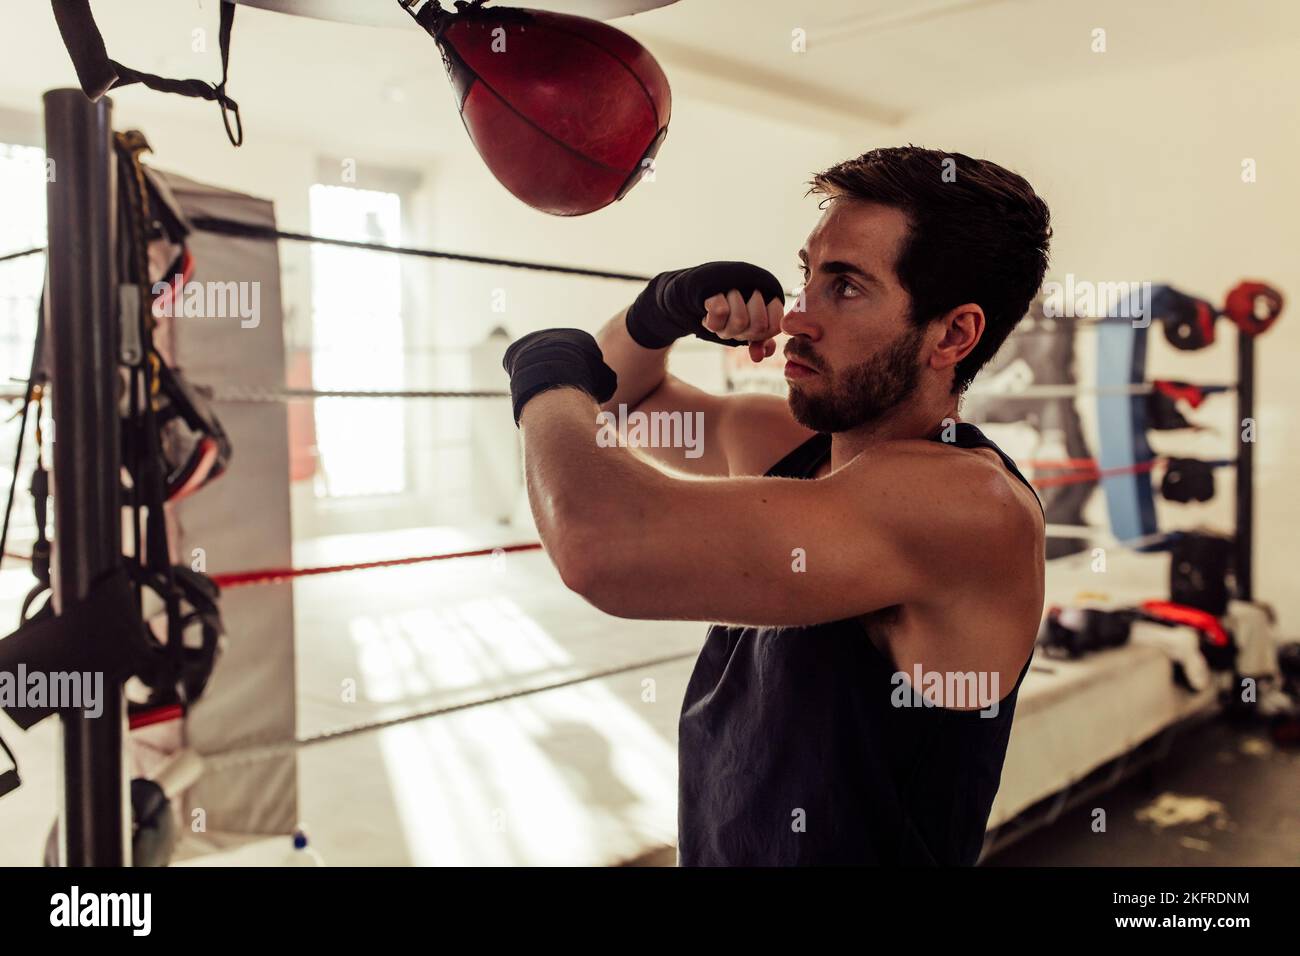 Boxer with a beard striking a punching bag in a fitness gym. Athletic young man working out in a boxing gym. Stock Photo